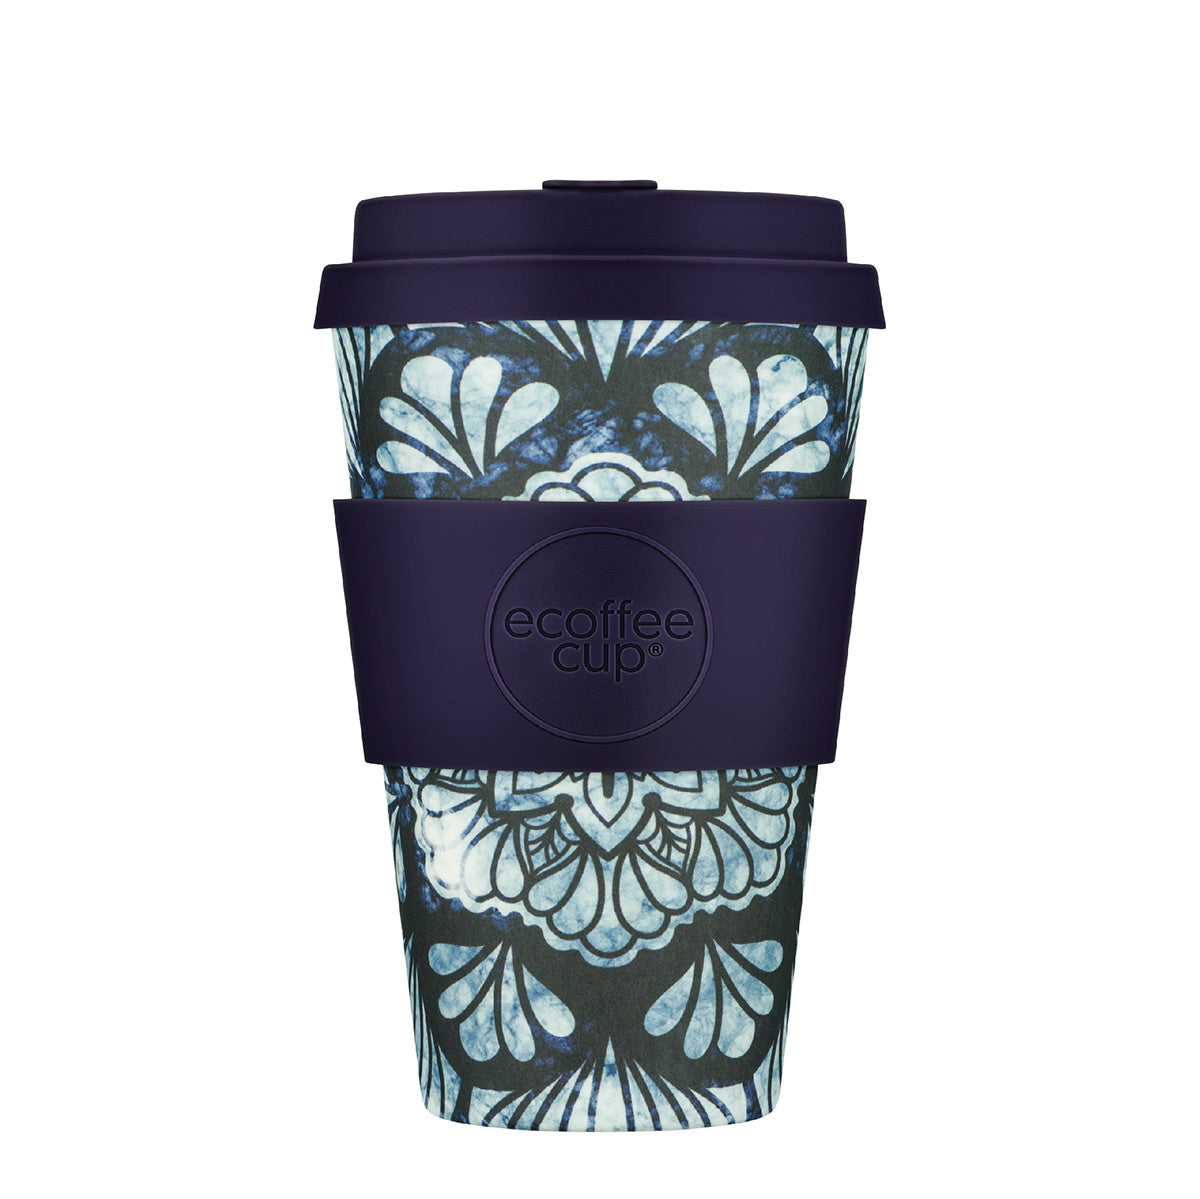 Whence the Fekawi Ecoffee Cup